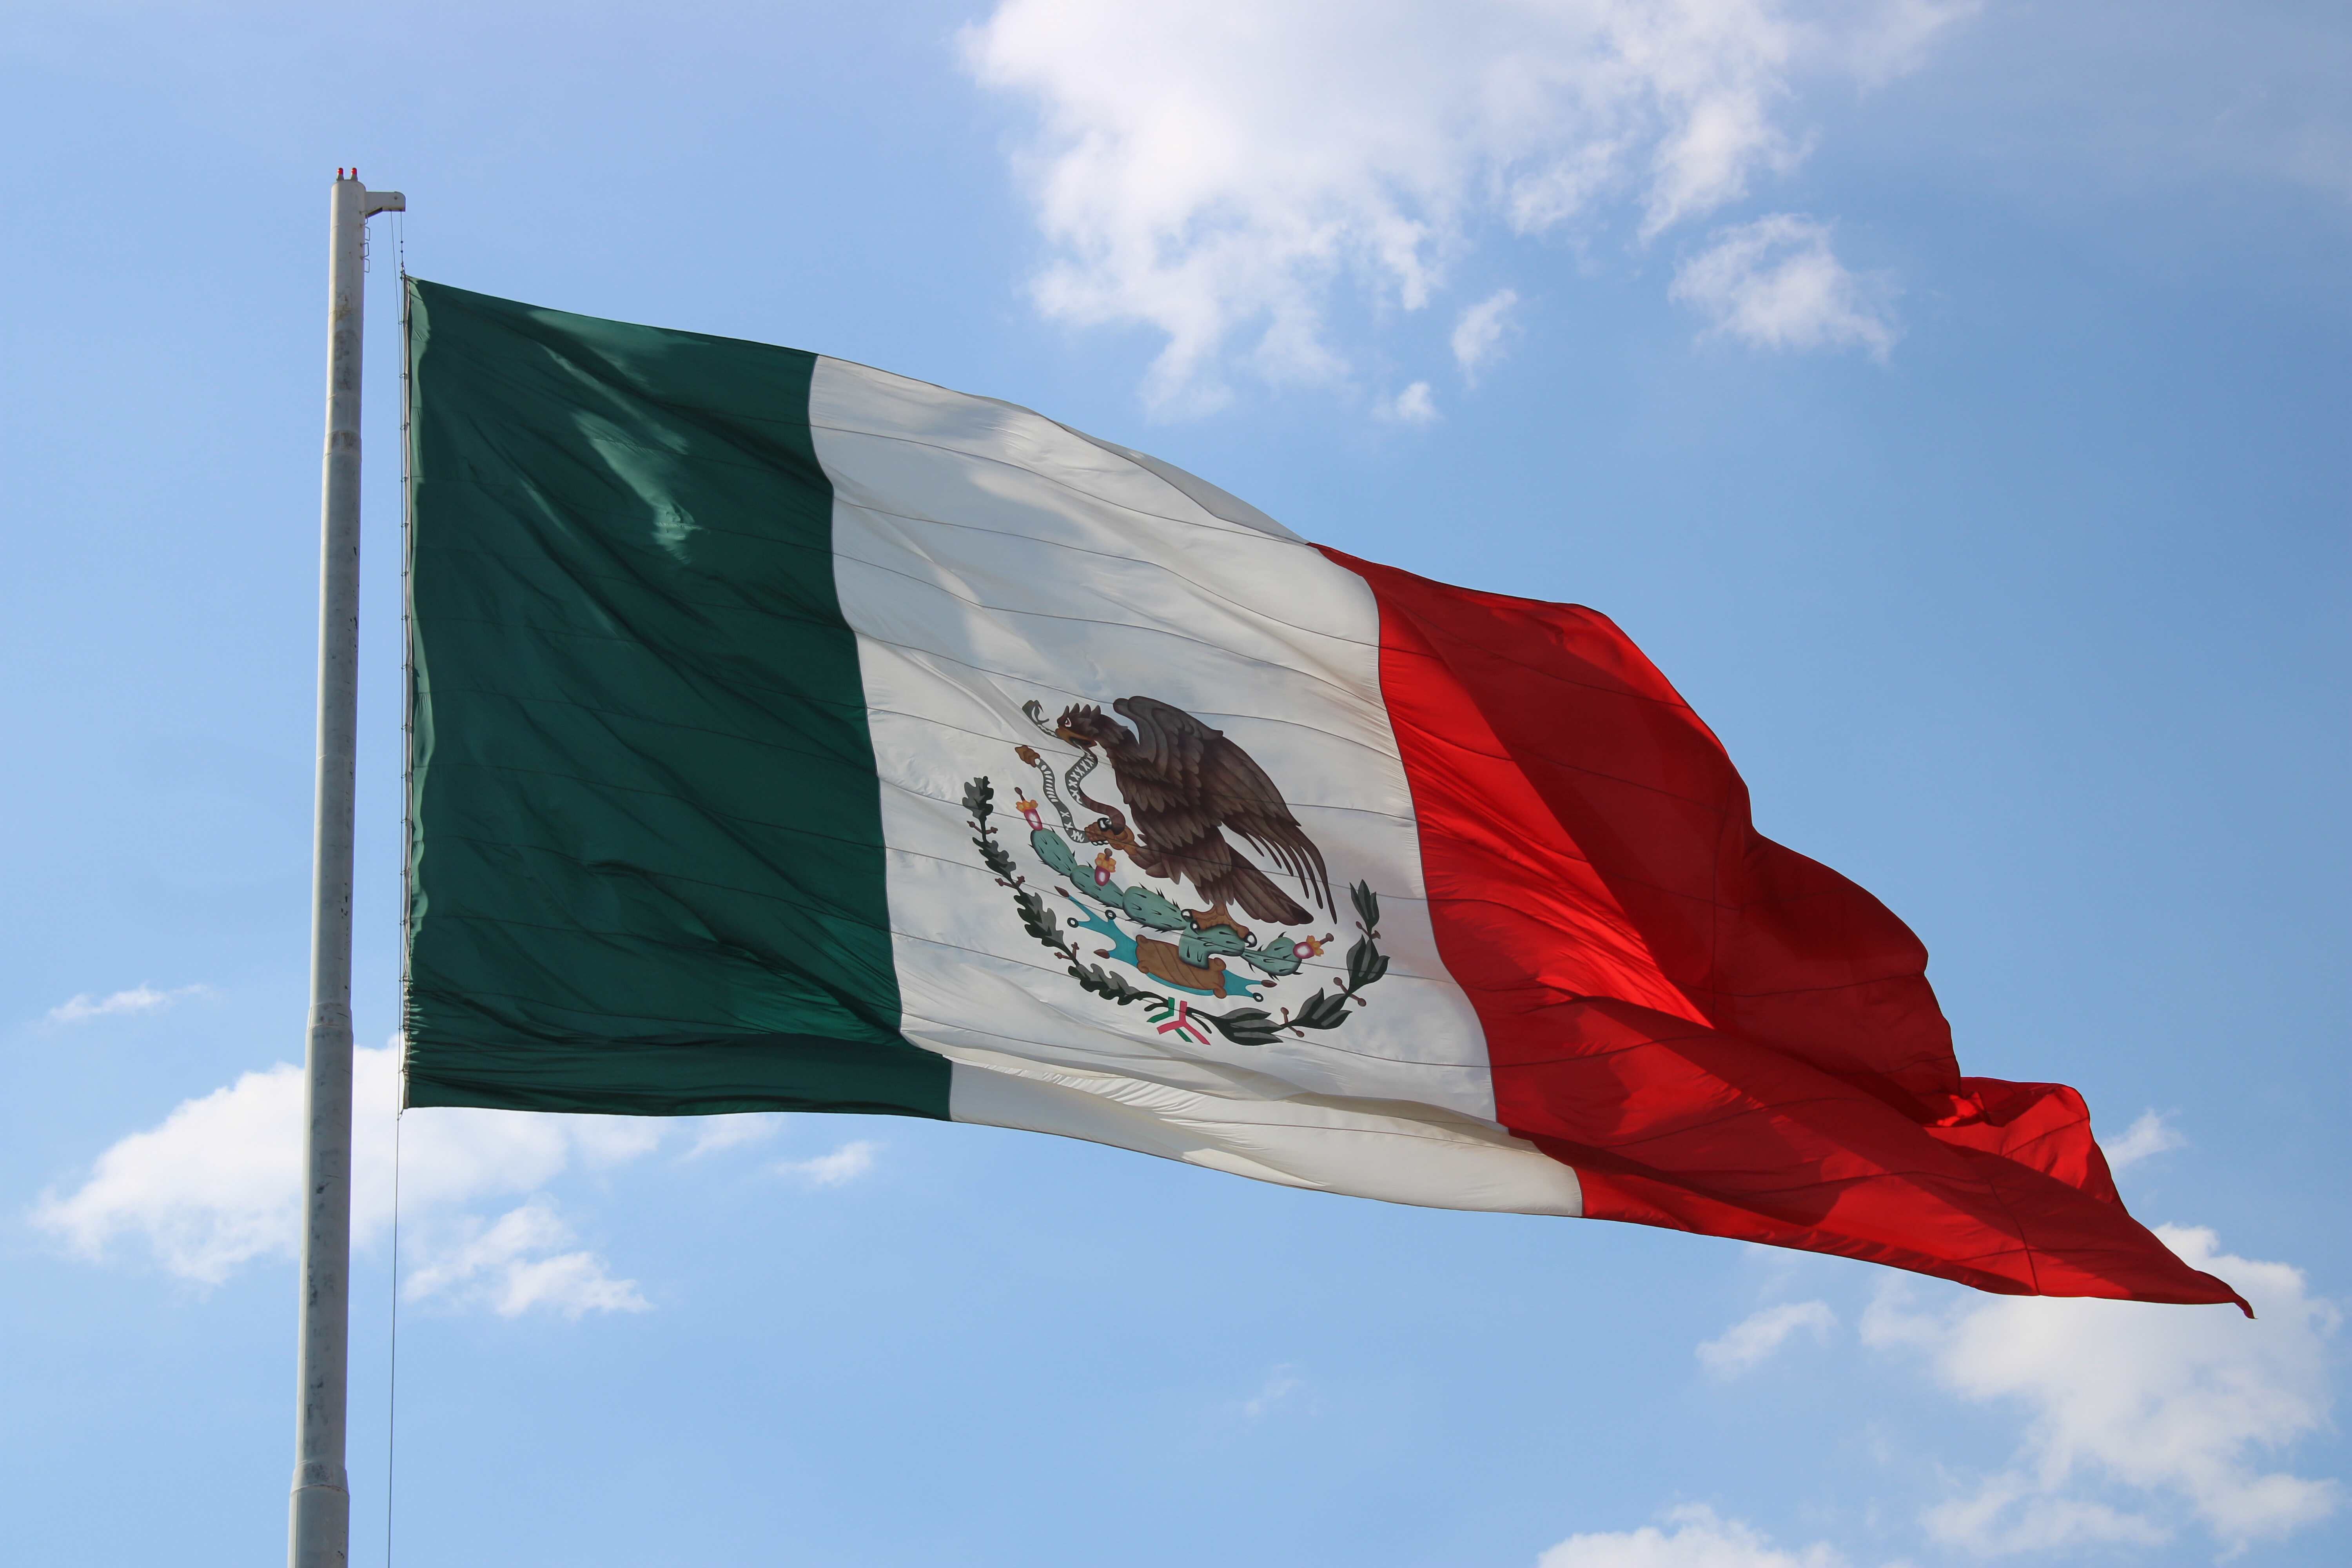 Escalation of Violence in Southern Mexico